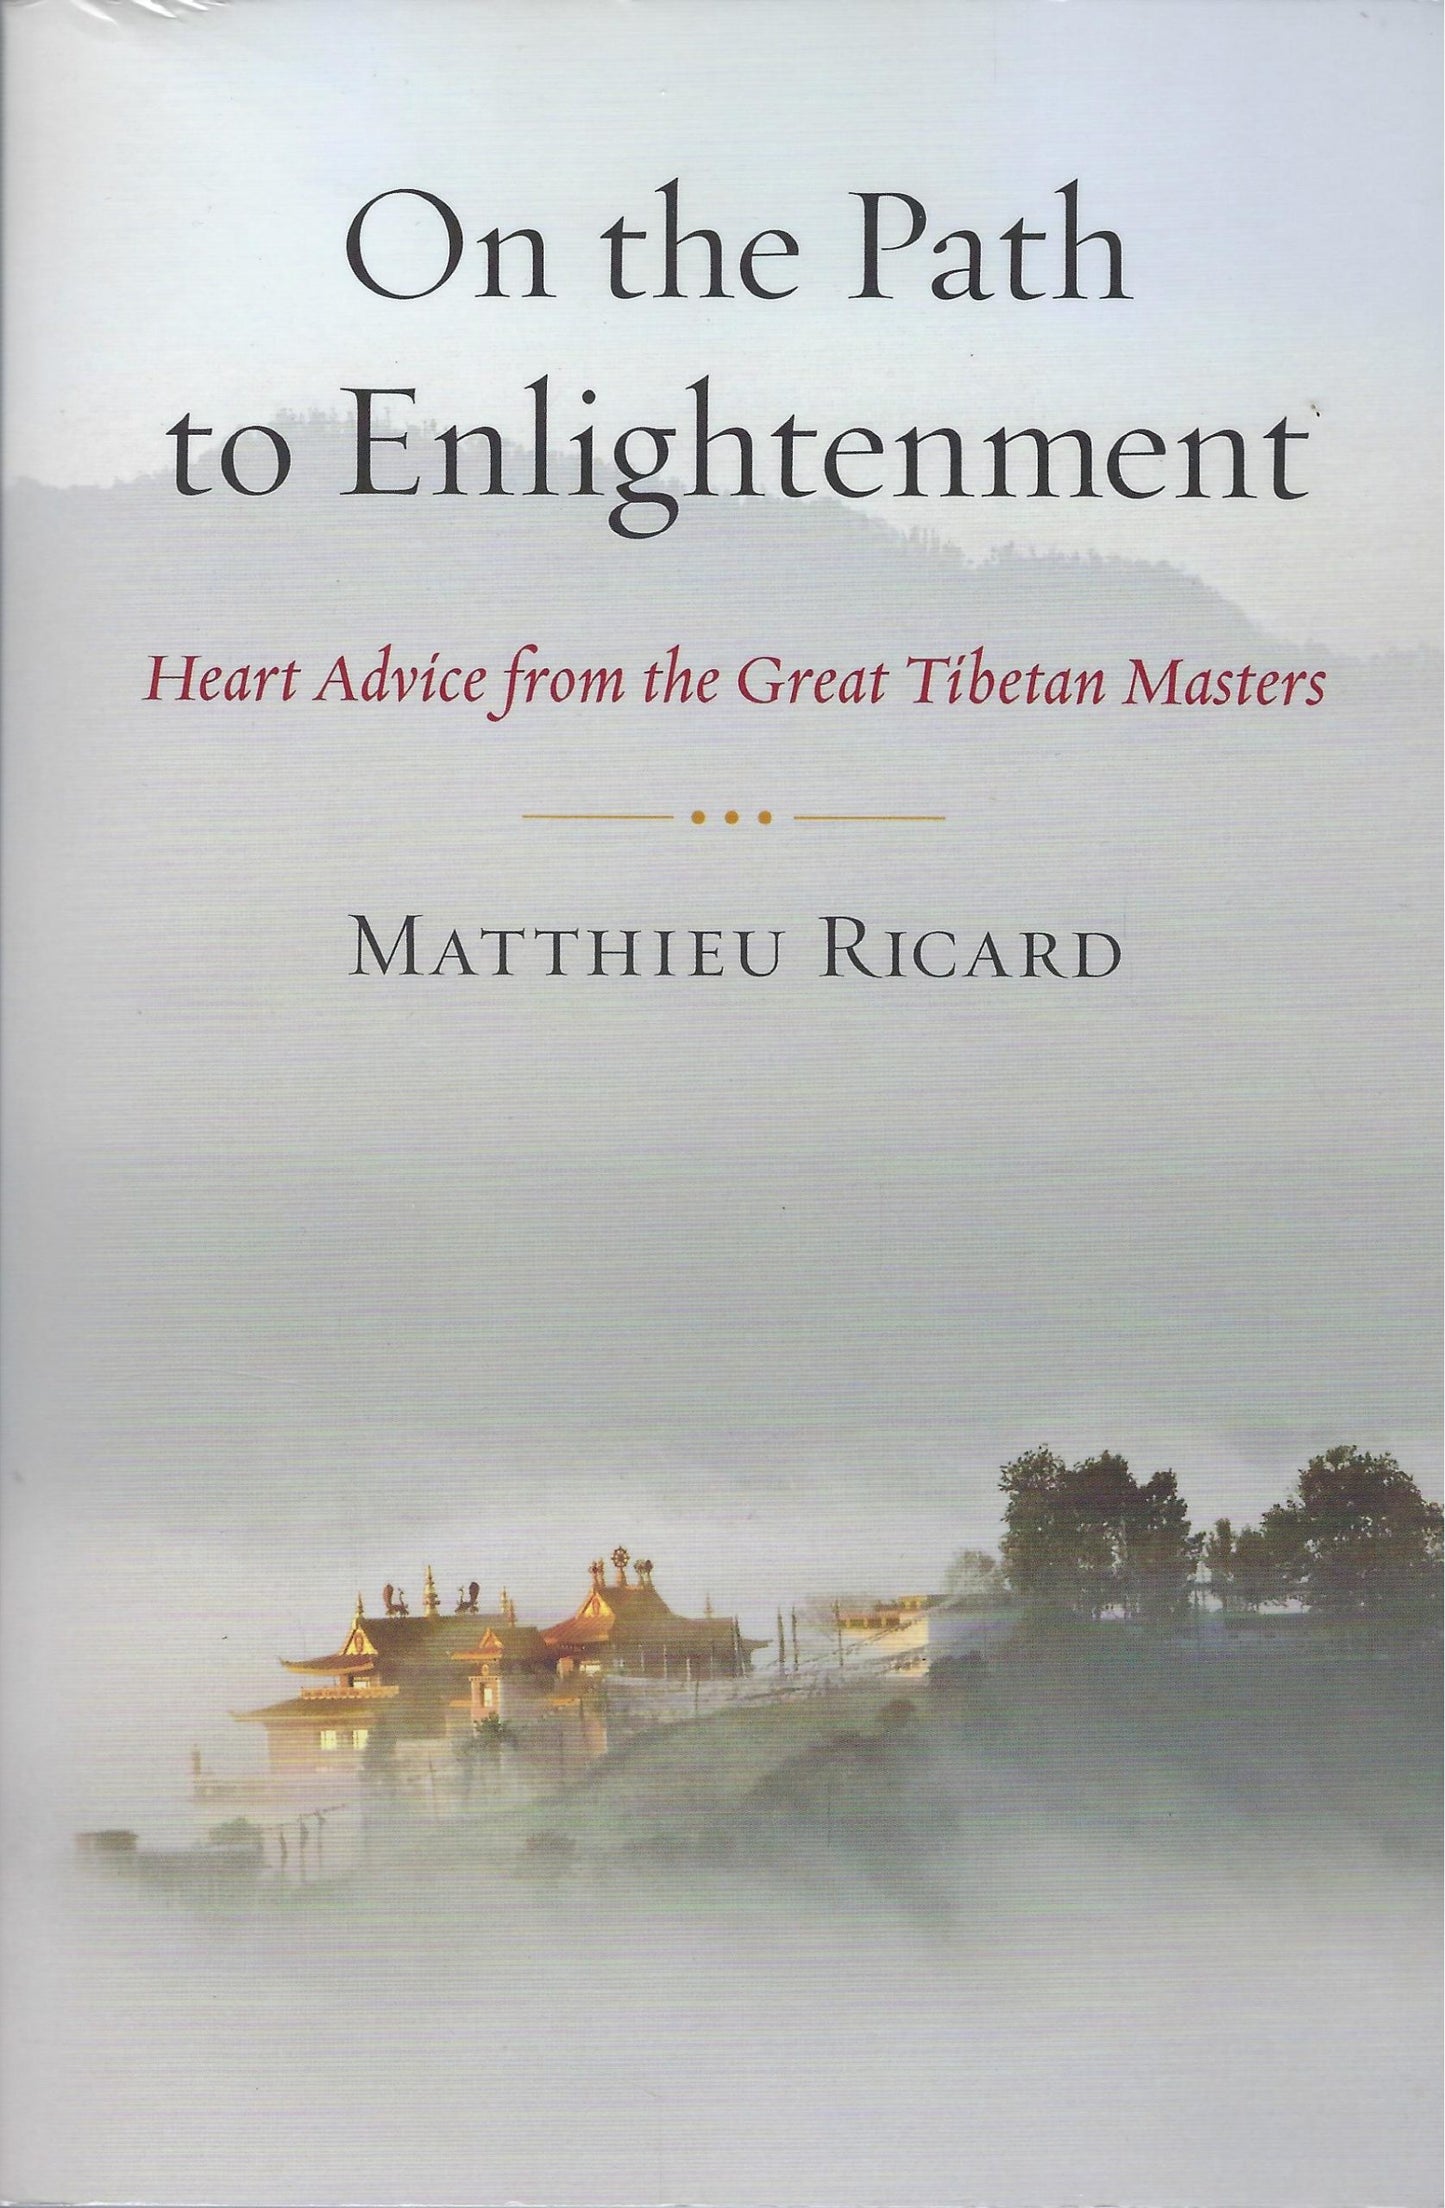 On the Path to Enlightenment